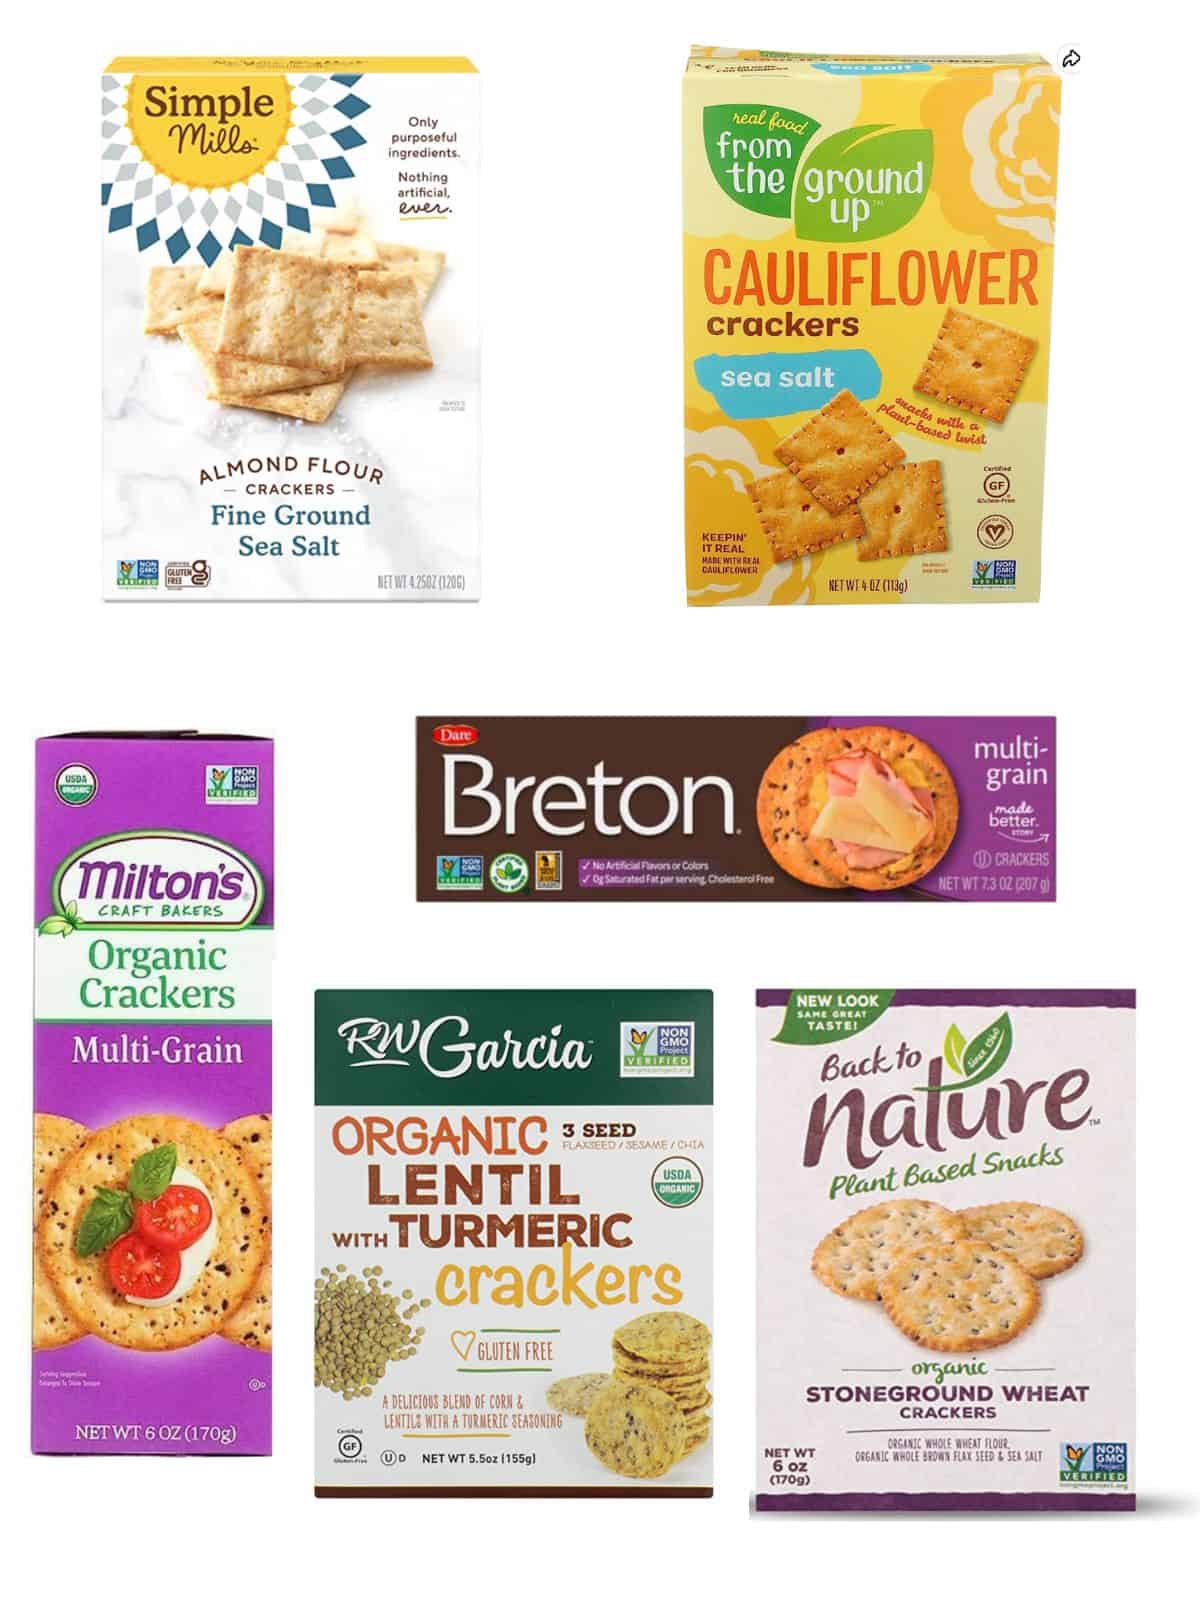 Six best crackers for toddlers in their packaging.